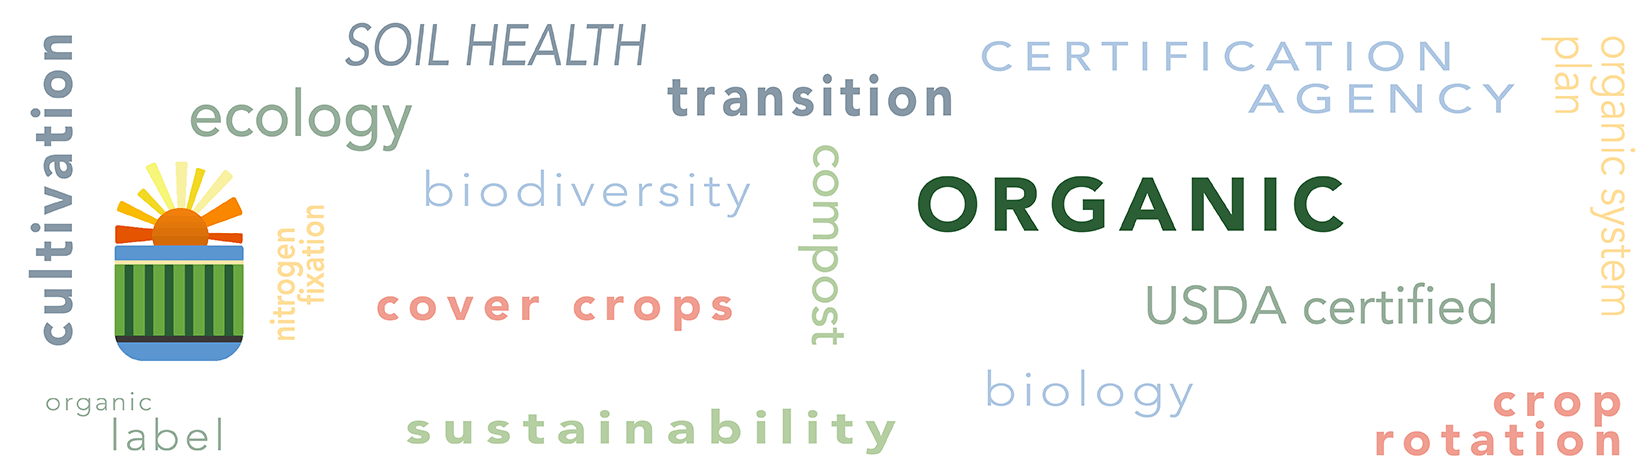 banner displaying the word organic surrounded by Urban Agriculture, Irrigation, Technoogy, integrated pest management, business and marketing, hydroponics, food safety, protected agriculture, rergulation and policy, economic impact, livestock production, season extension, sustainability, pasture management, farmscaping and farm systems, postharvest handling, aquaponics